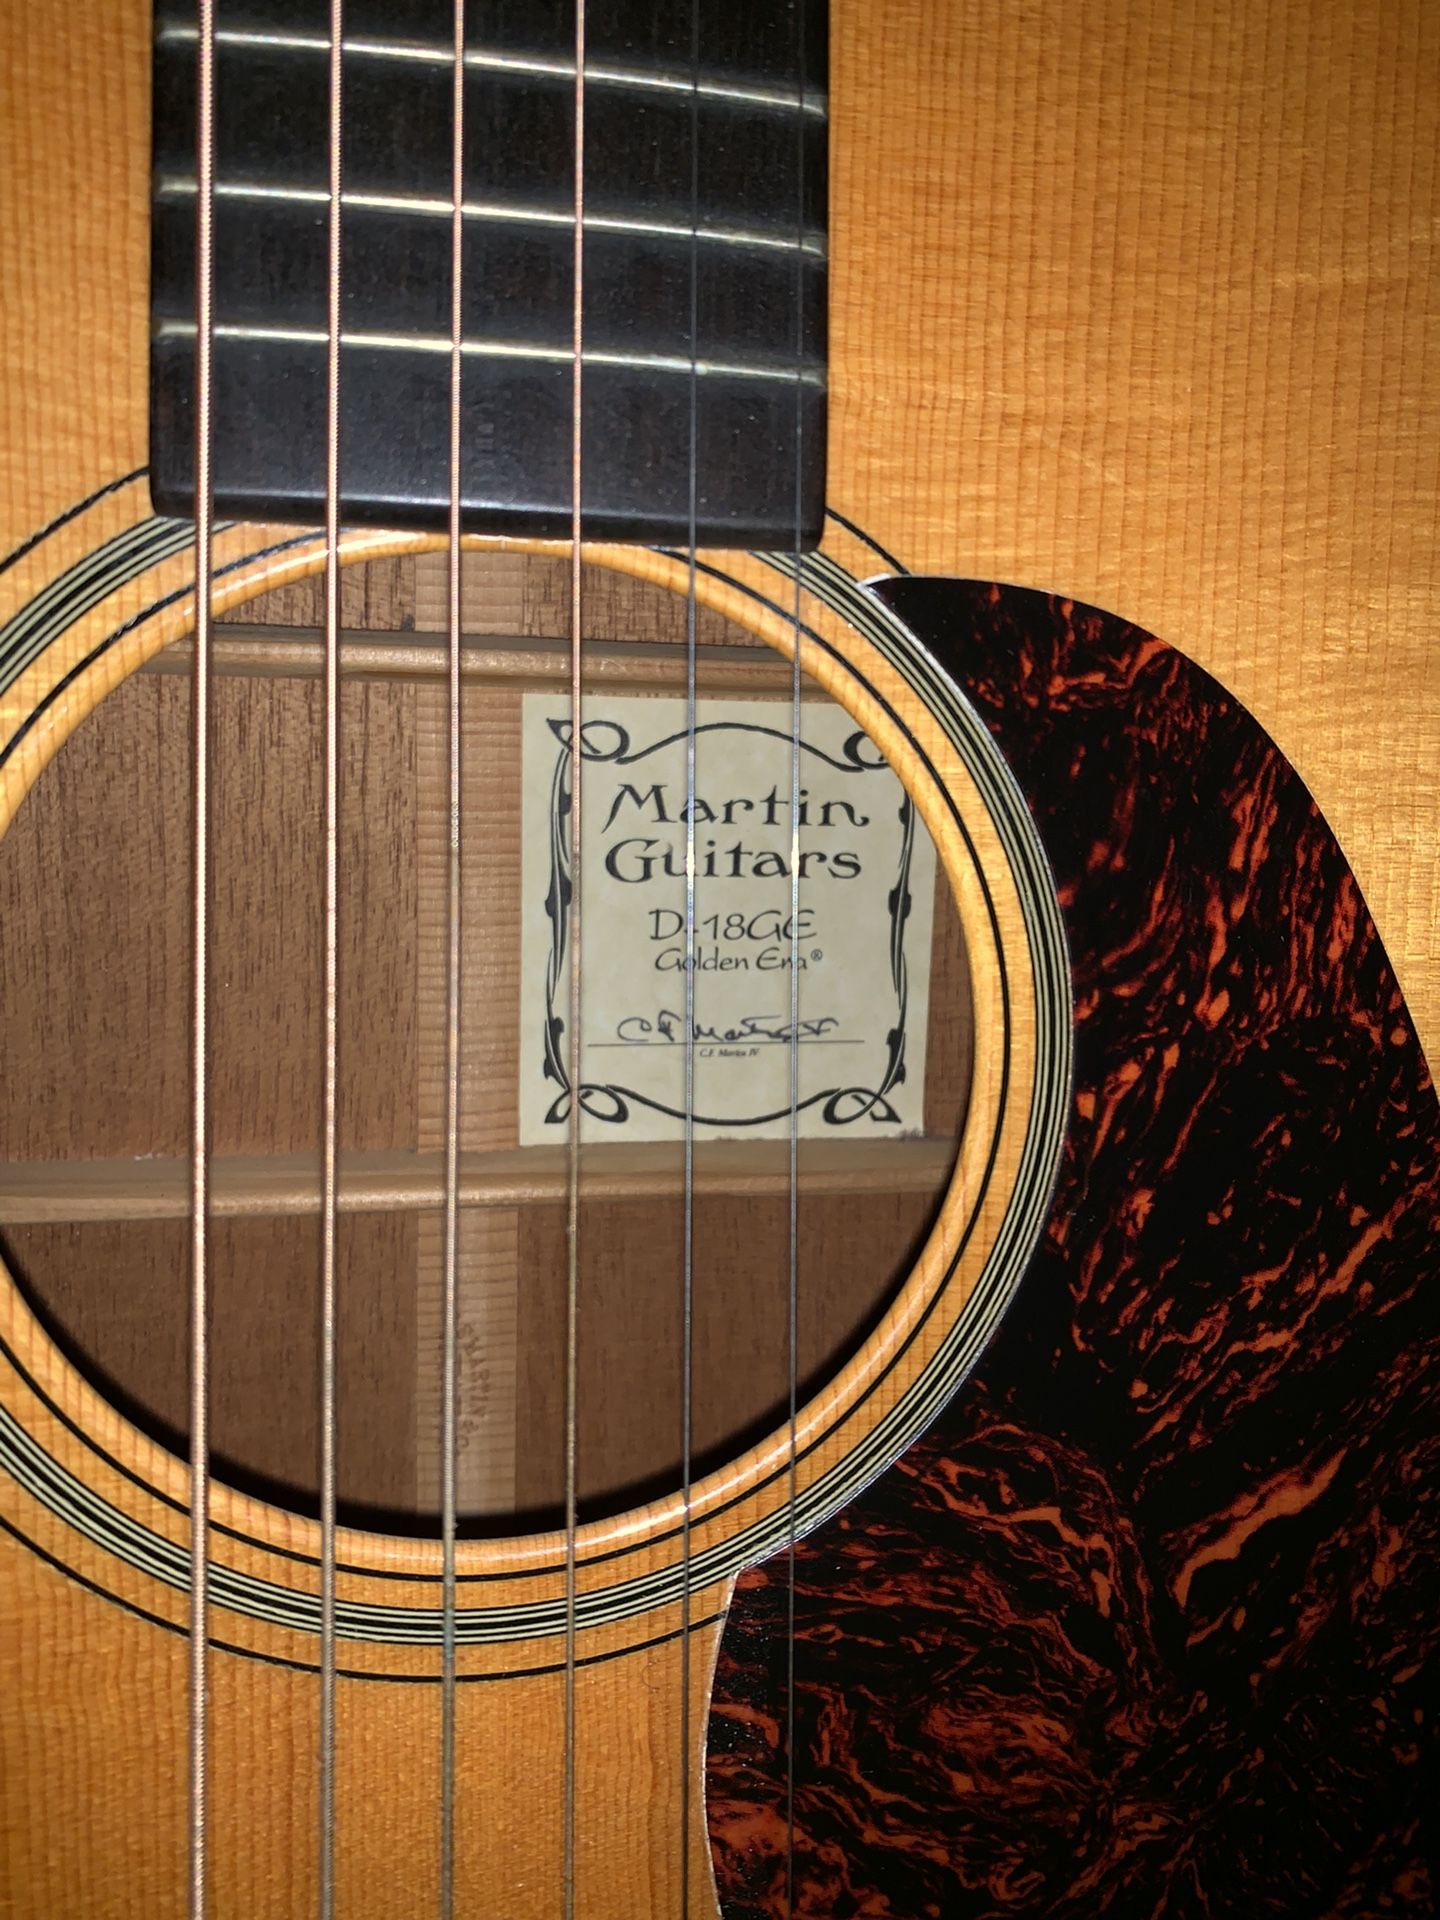 Martin Acoustic